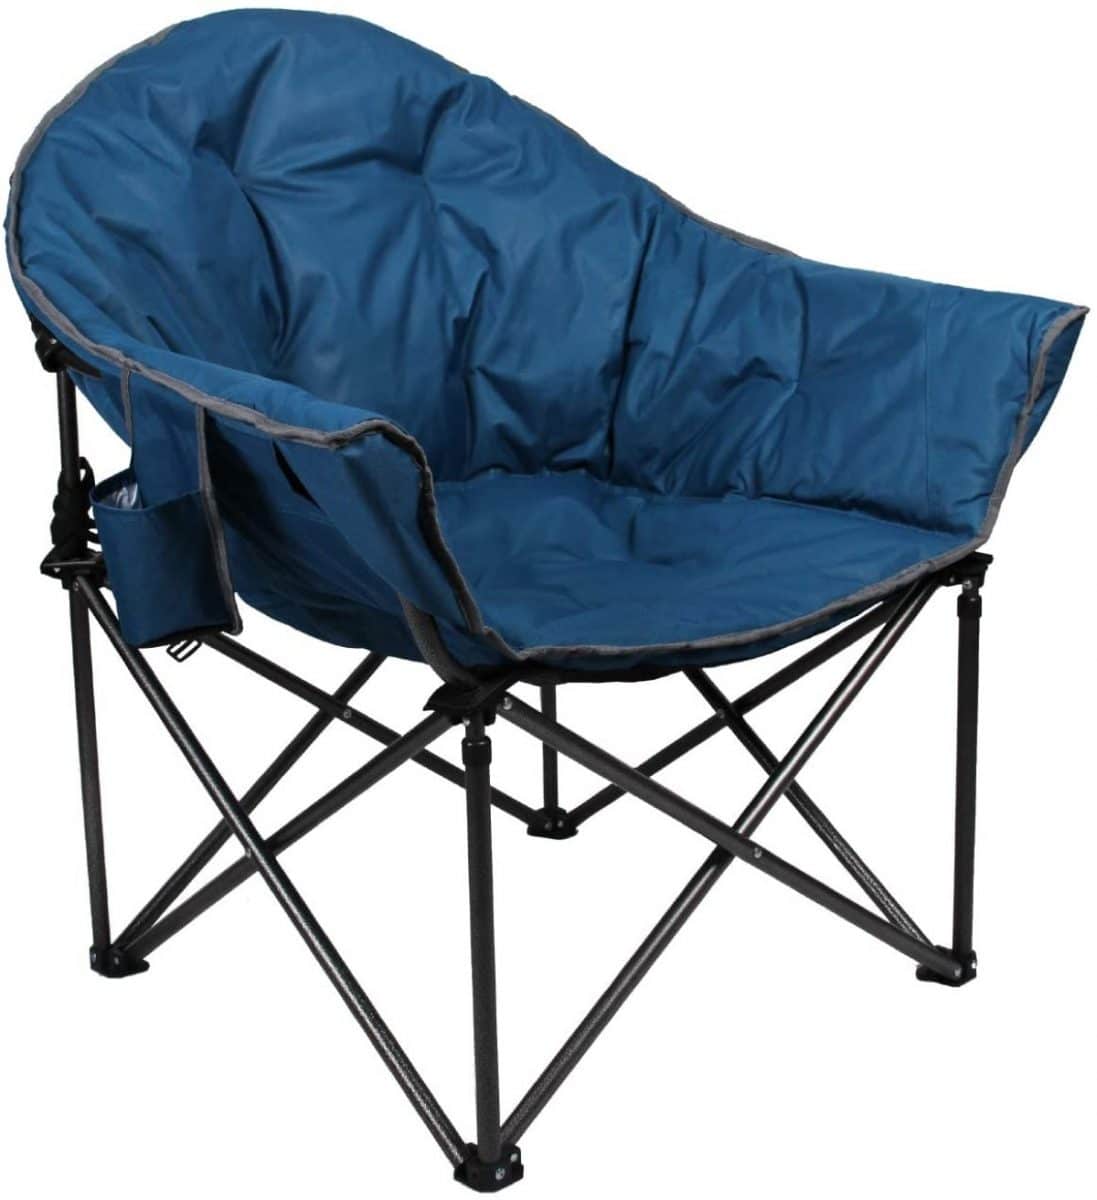 ALPHA CAMP Oversized Camping Chairs Padded Moon Round Chair